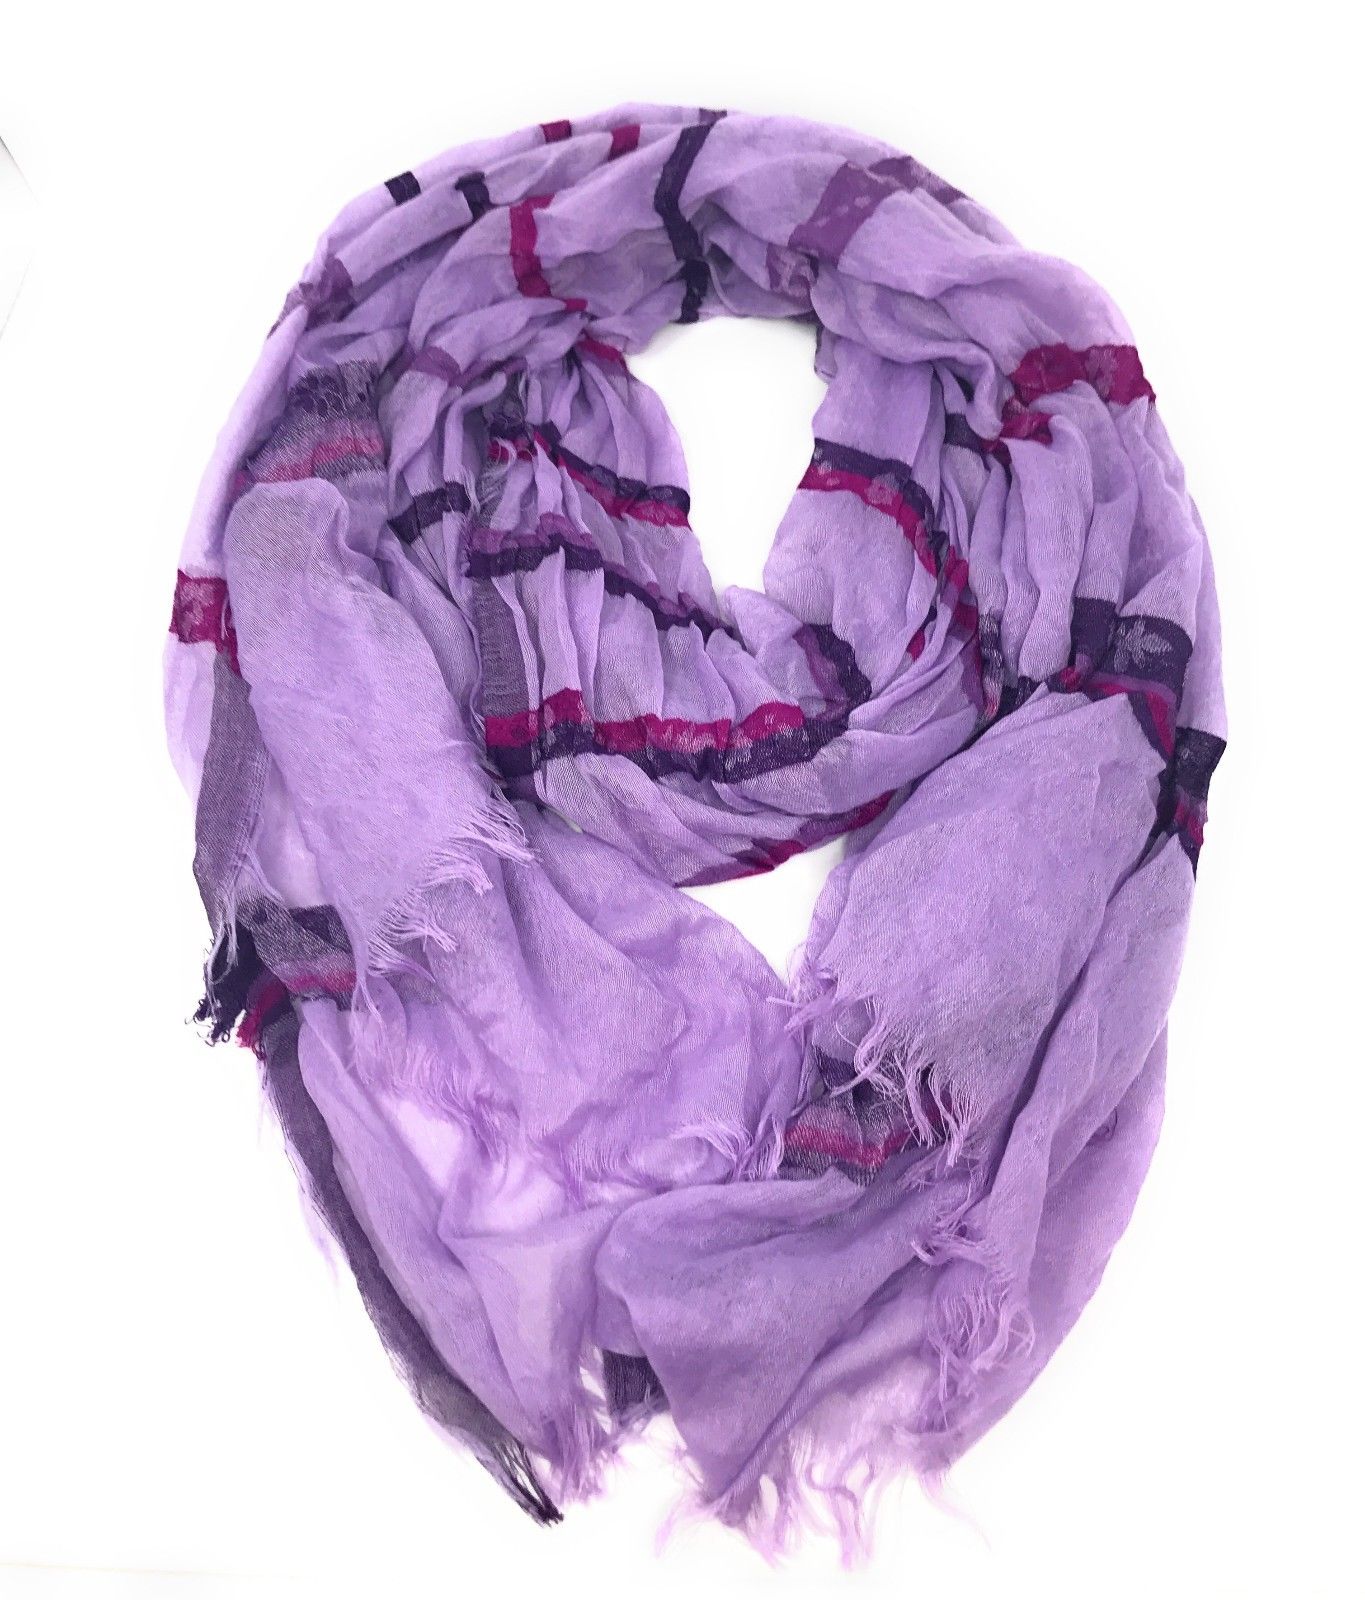 Casaba Women’s Elegant Scarves for Fall Only $4.99 + FREE Shipping!